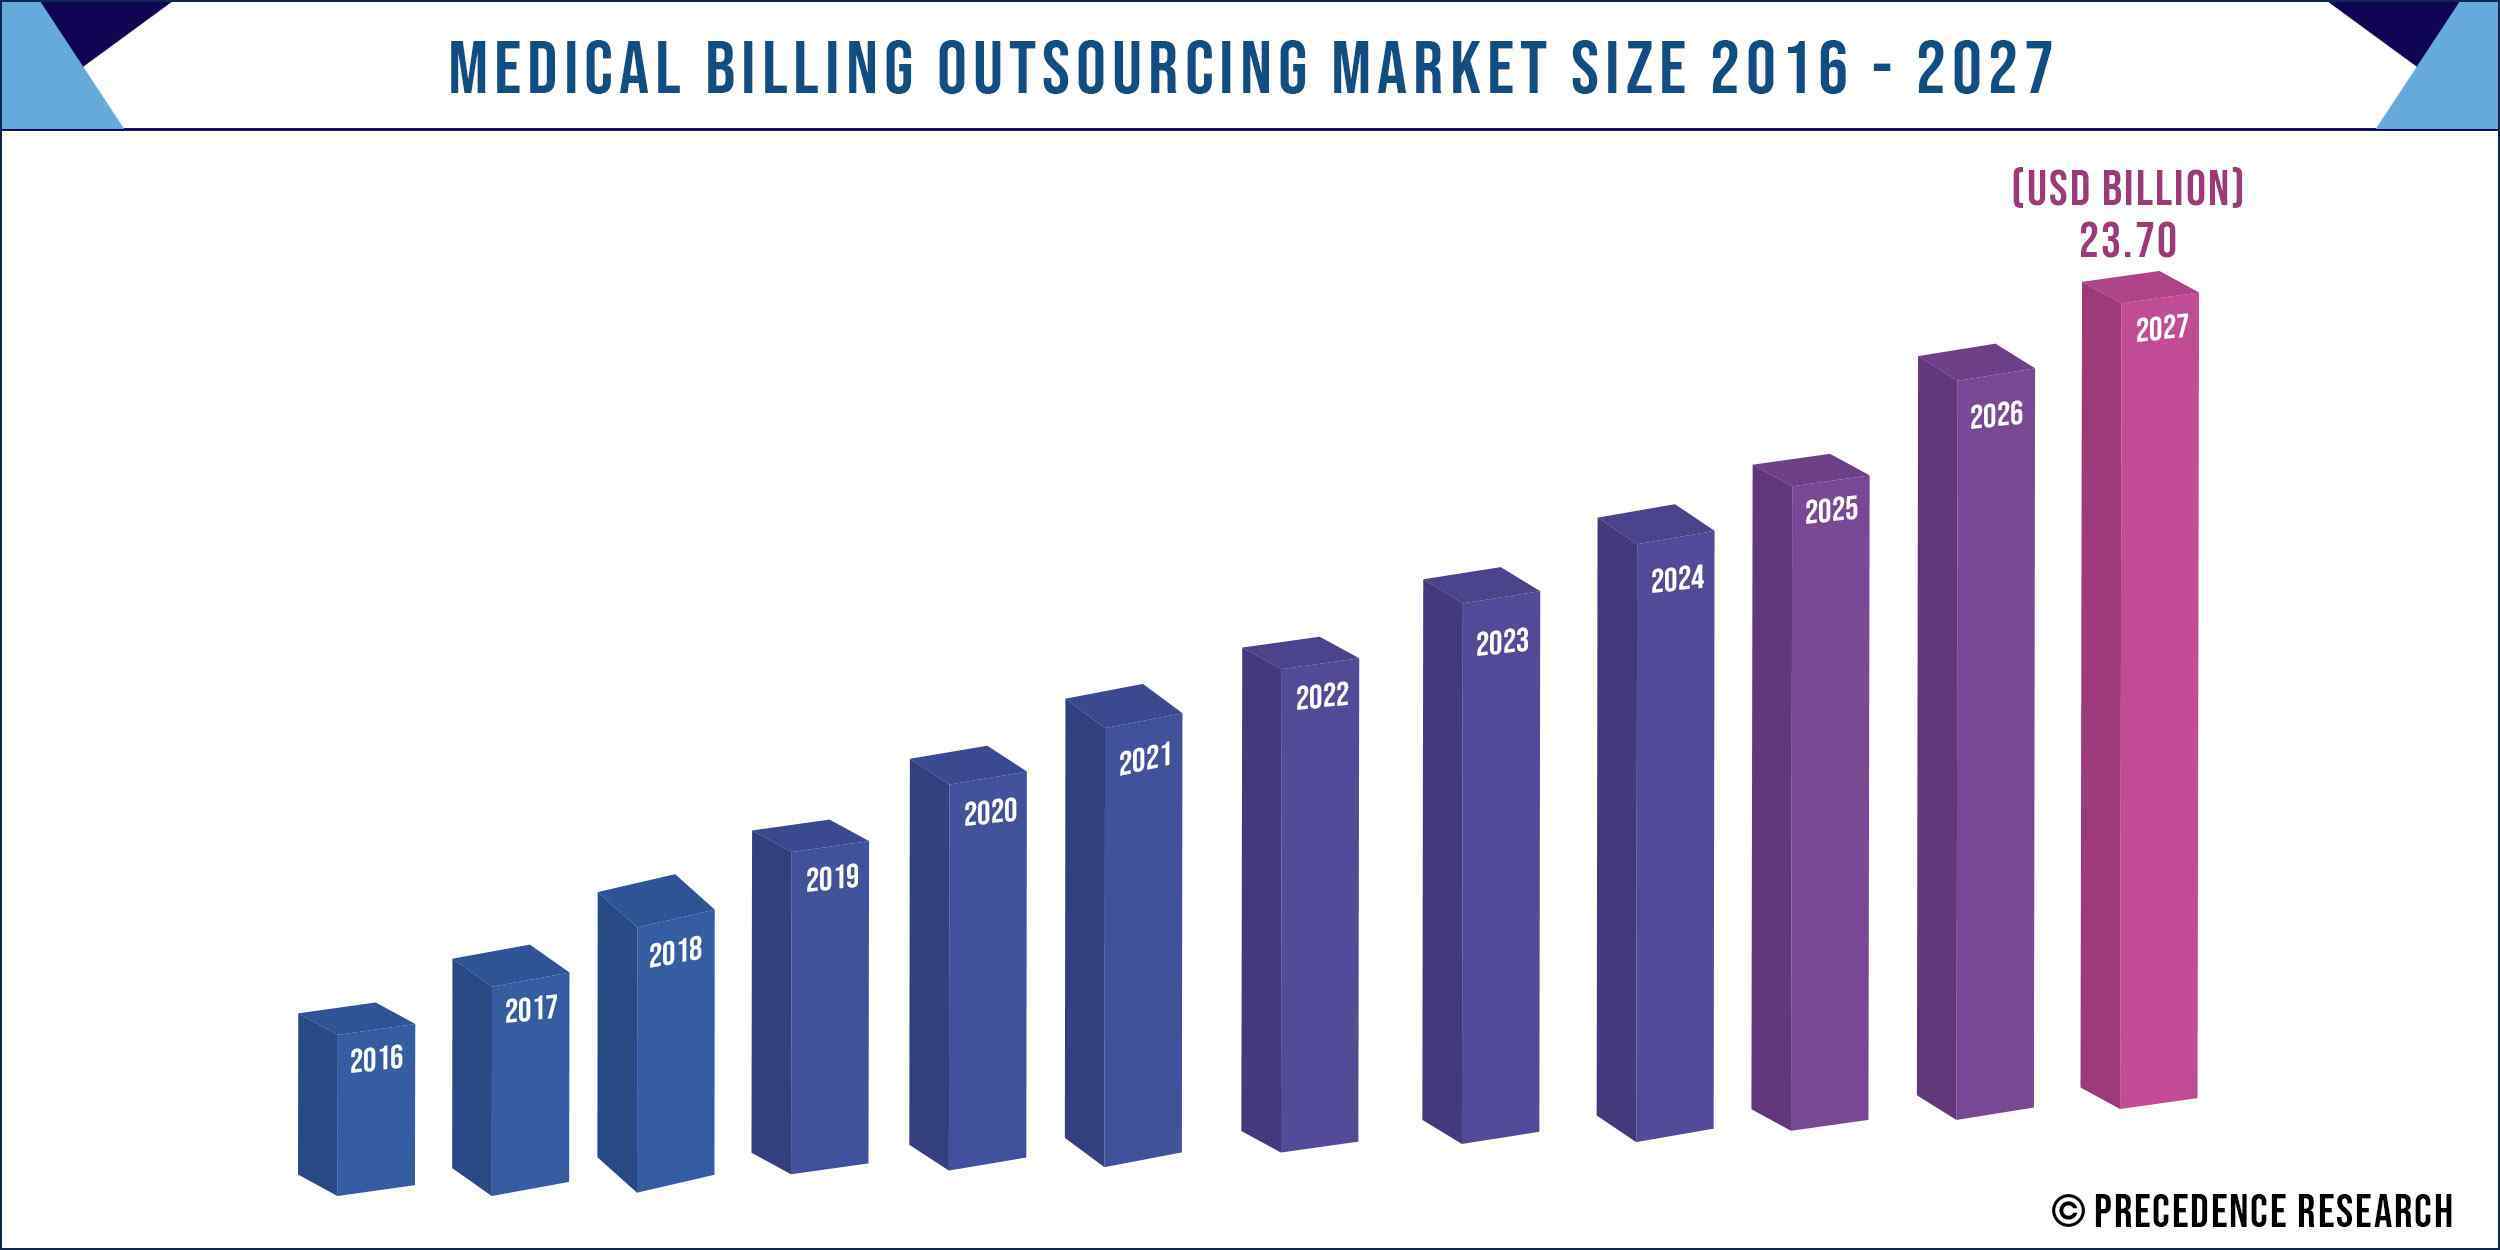 Medical Billing Outsourcing Market Size 2016 to 2027